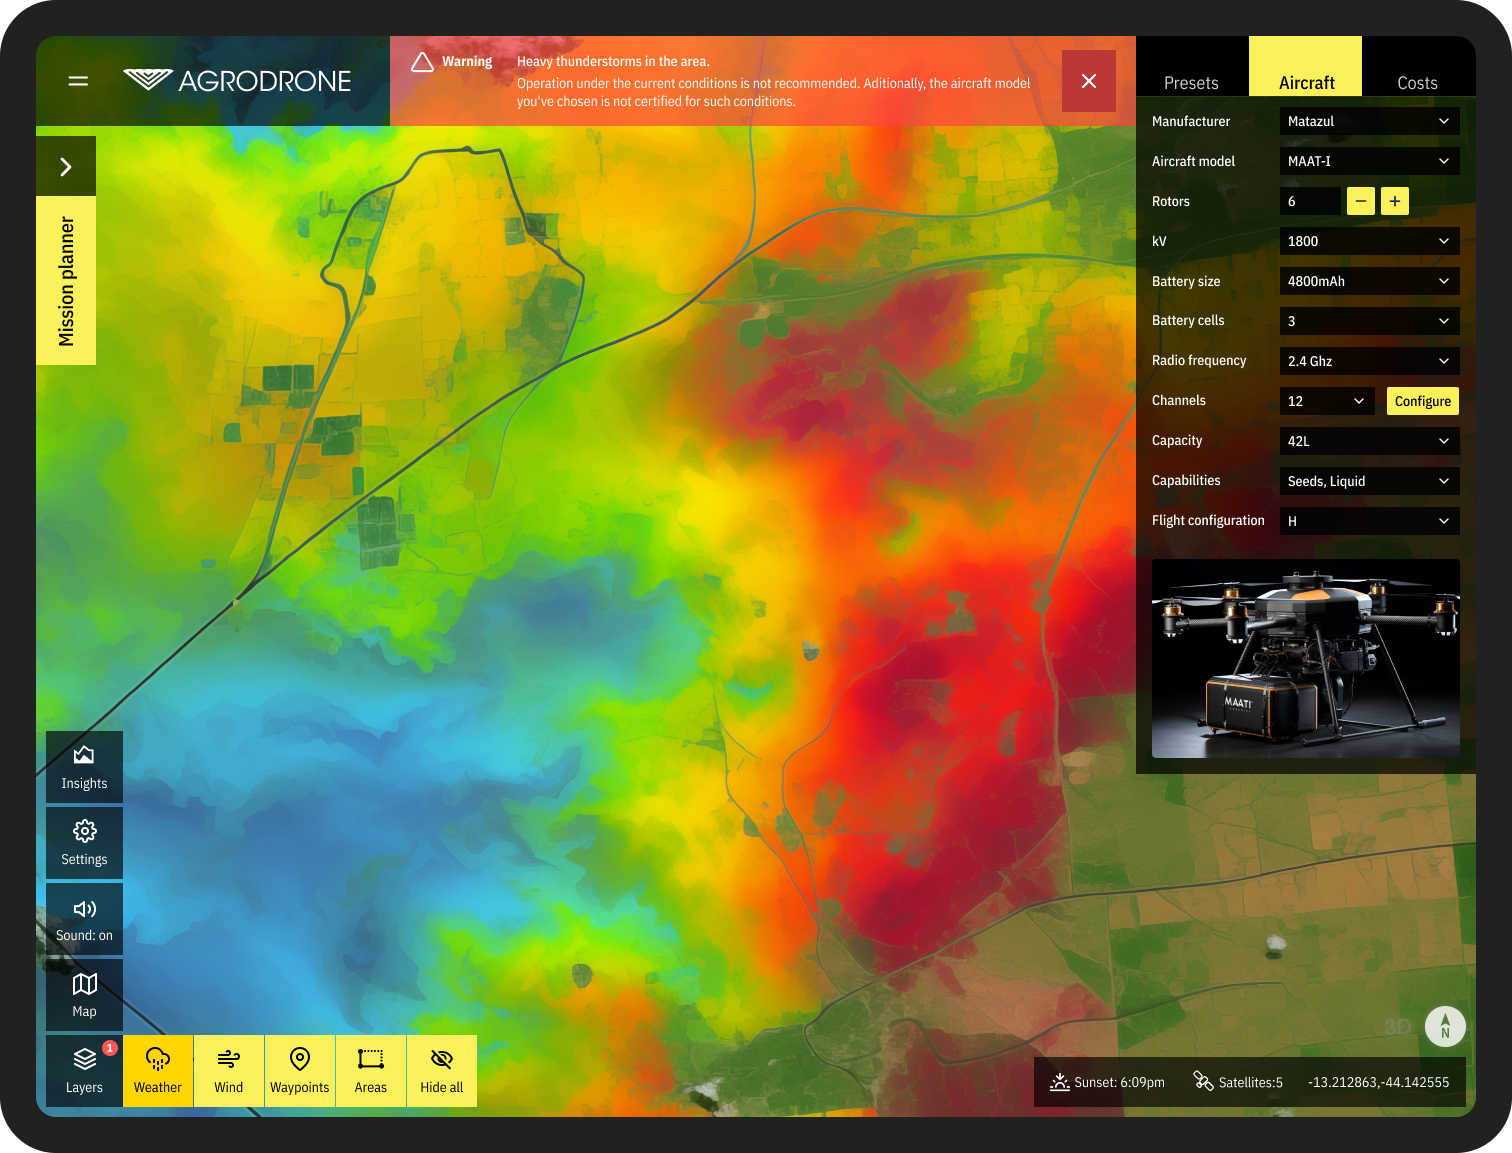 Agrodrone crop dust with drones app on an iPad - weather view